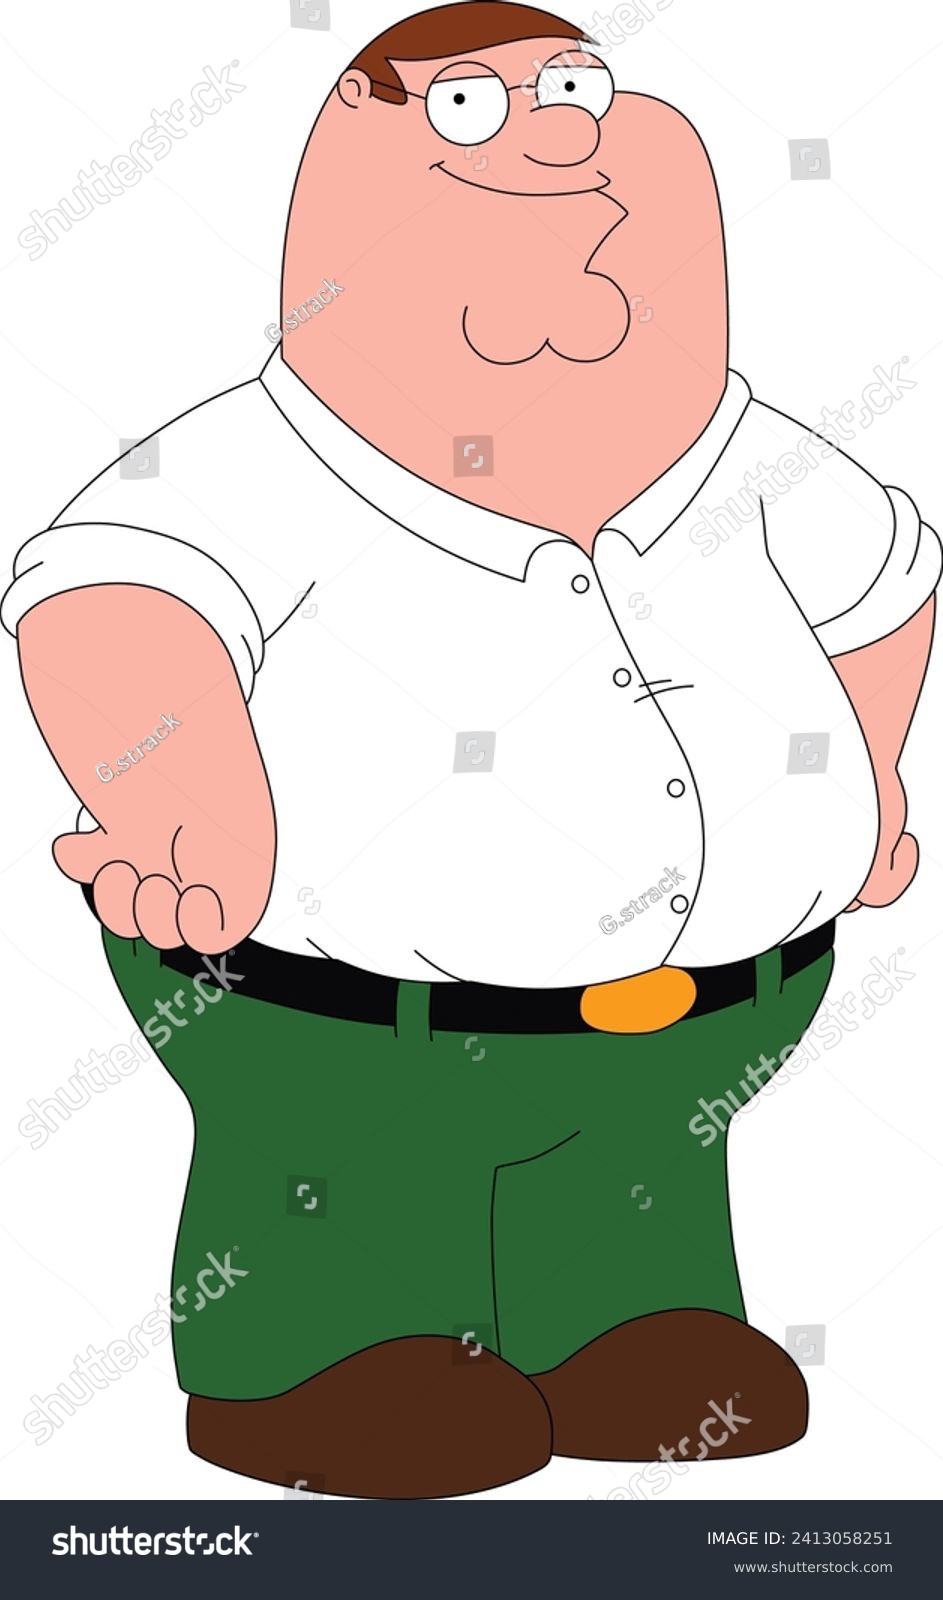 Vector cartoon illustrations of the Peter Griffin character from the Family Guy cartoon are suitable for kids' cartoon coloring books, printing, and various design purposes.Cartoon vector Eps 10 #2413058251